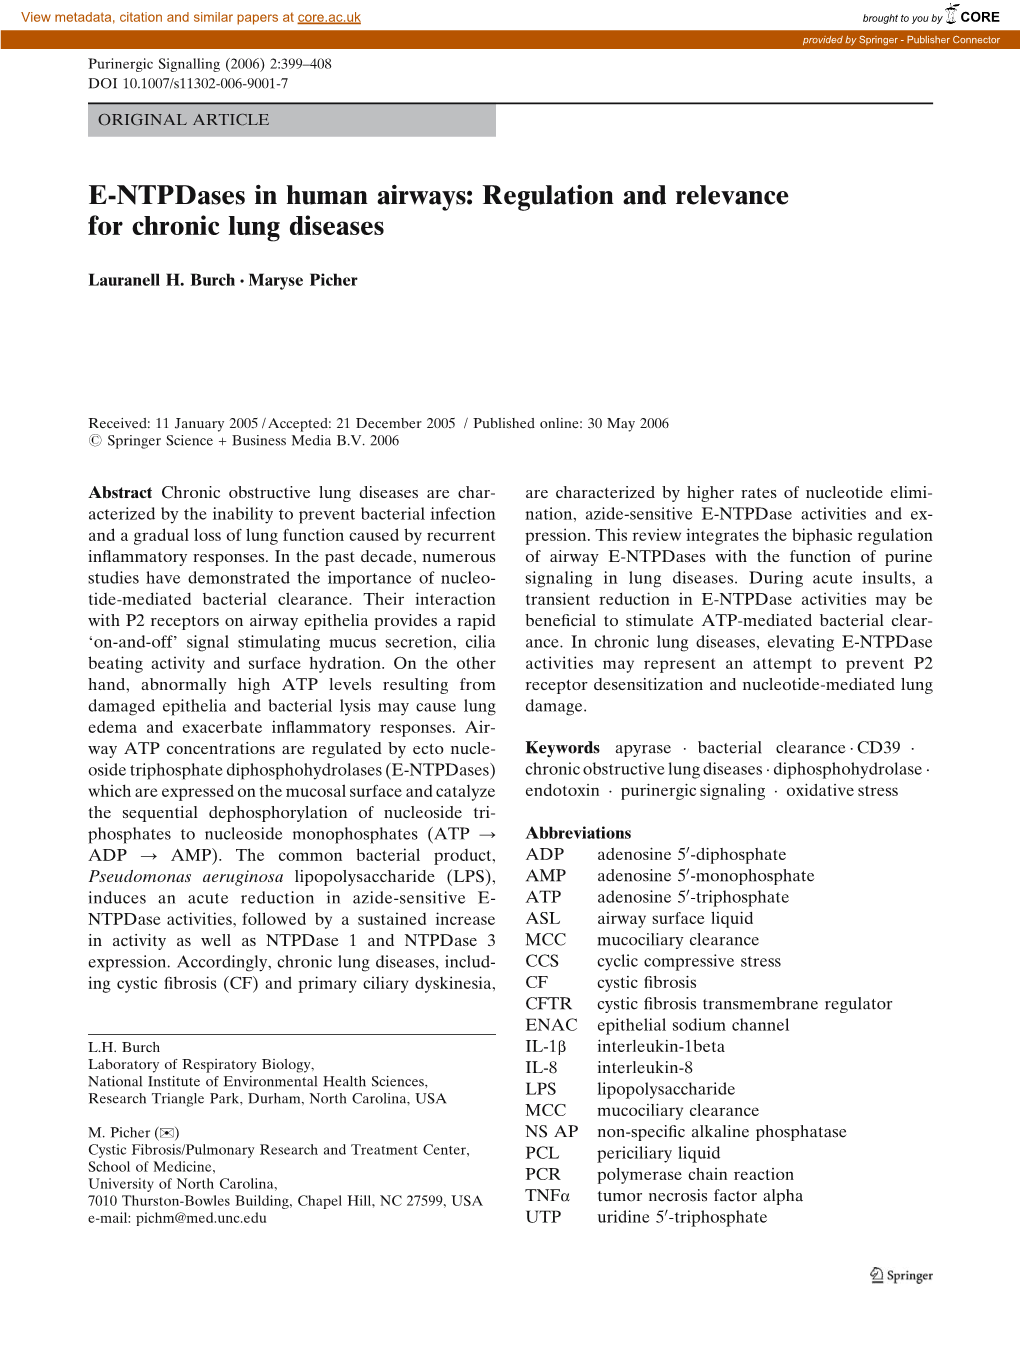 Regulation and Relevance for Chronic Lung Diseases